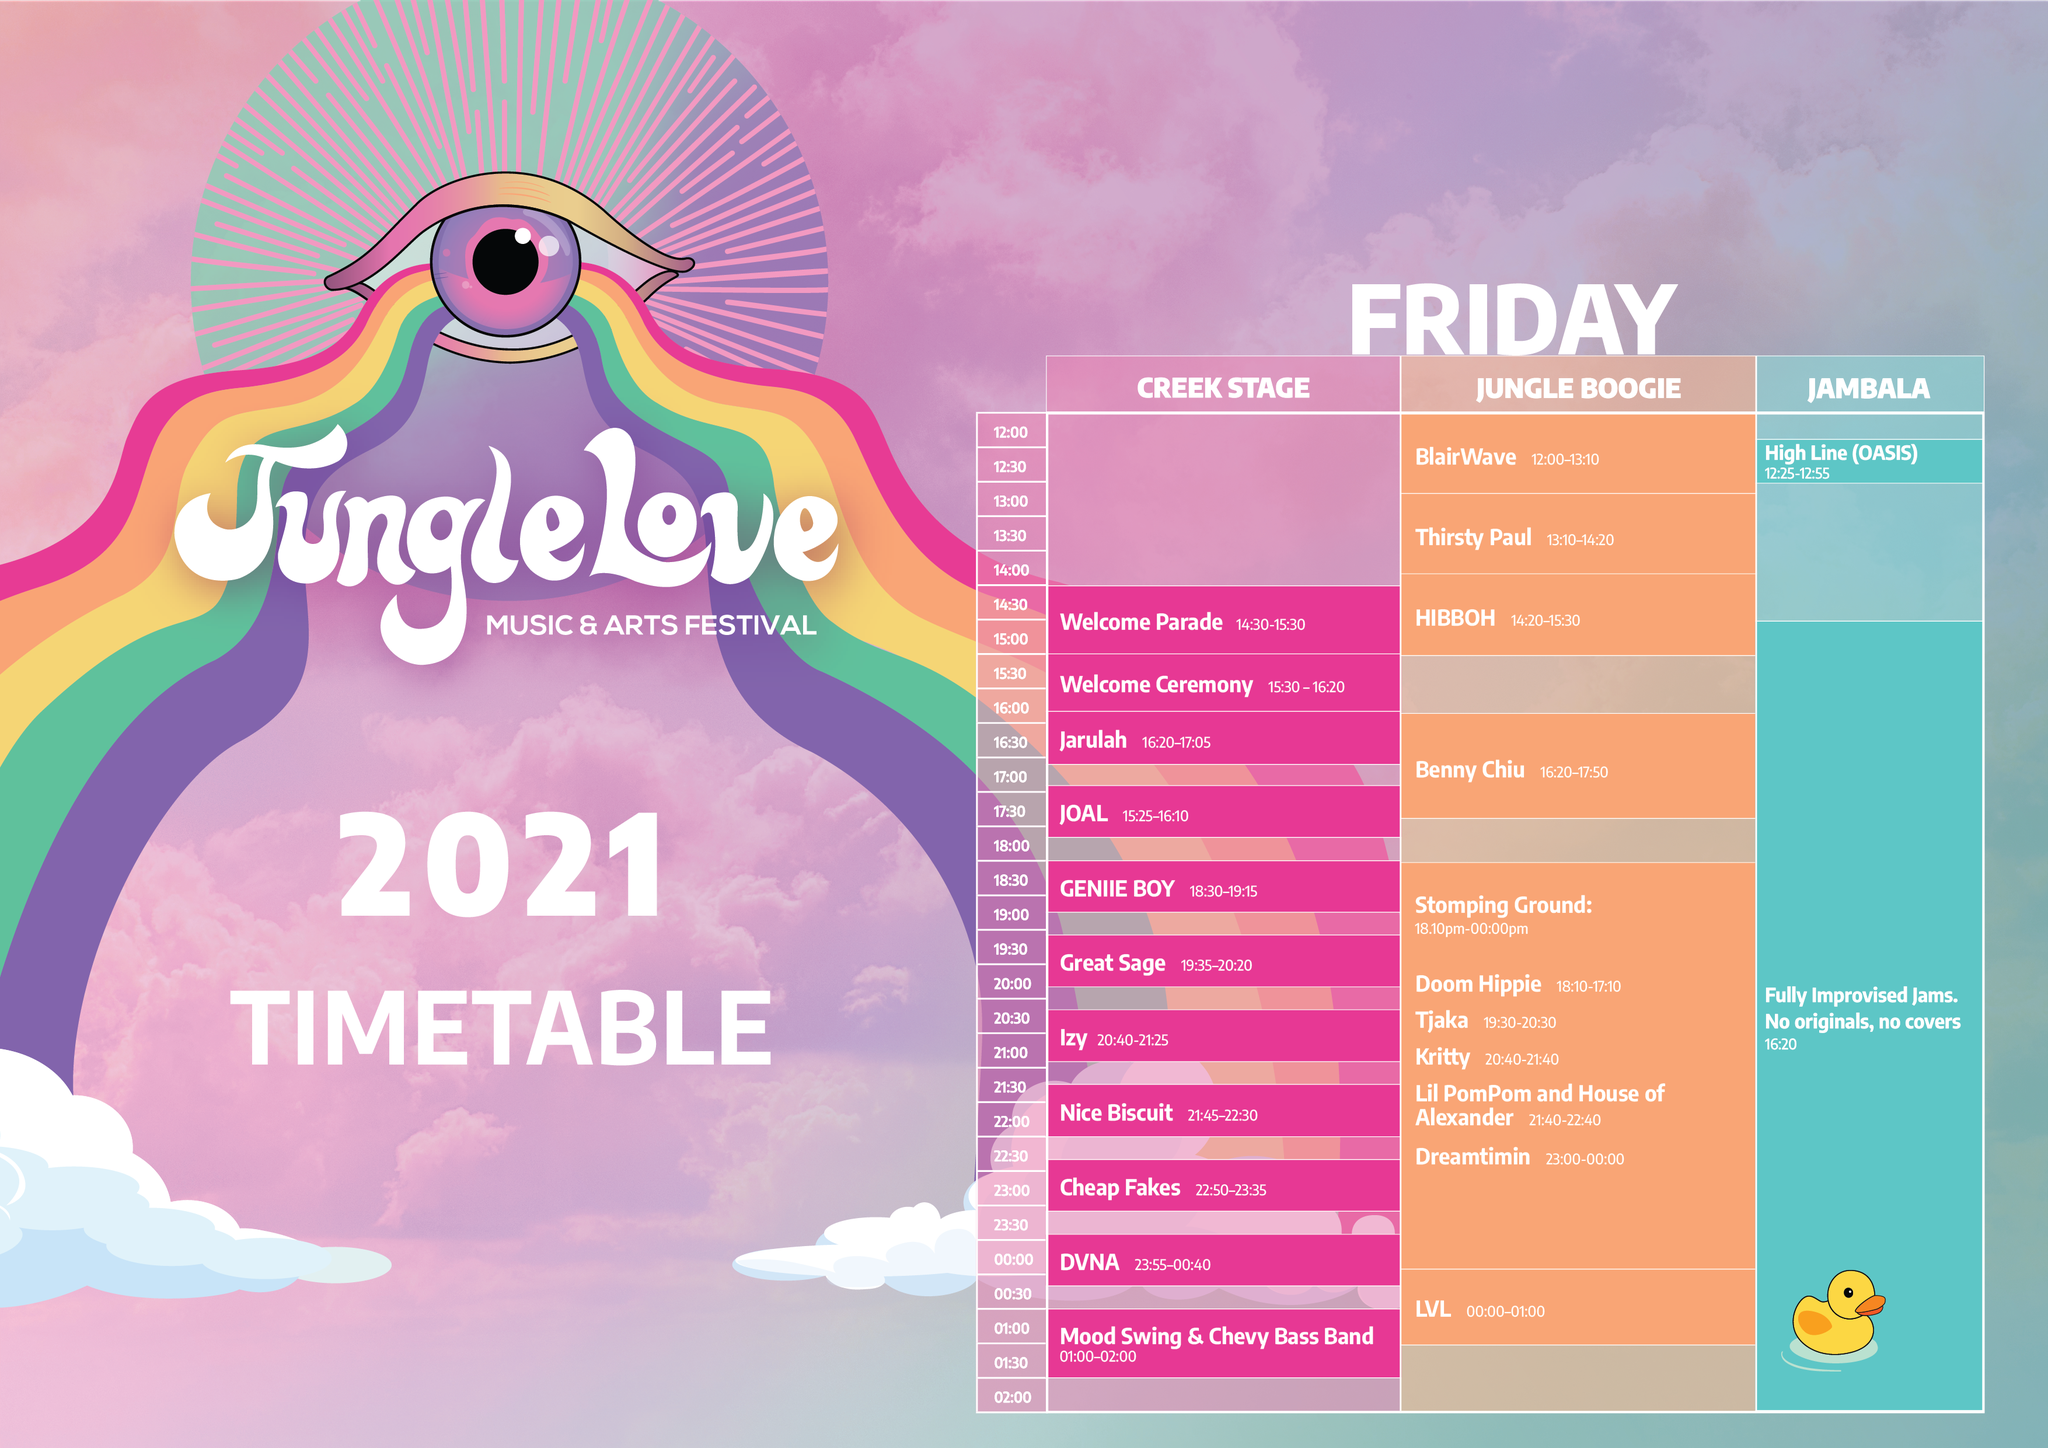 Jungle Love 2021 Friday timetable